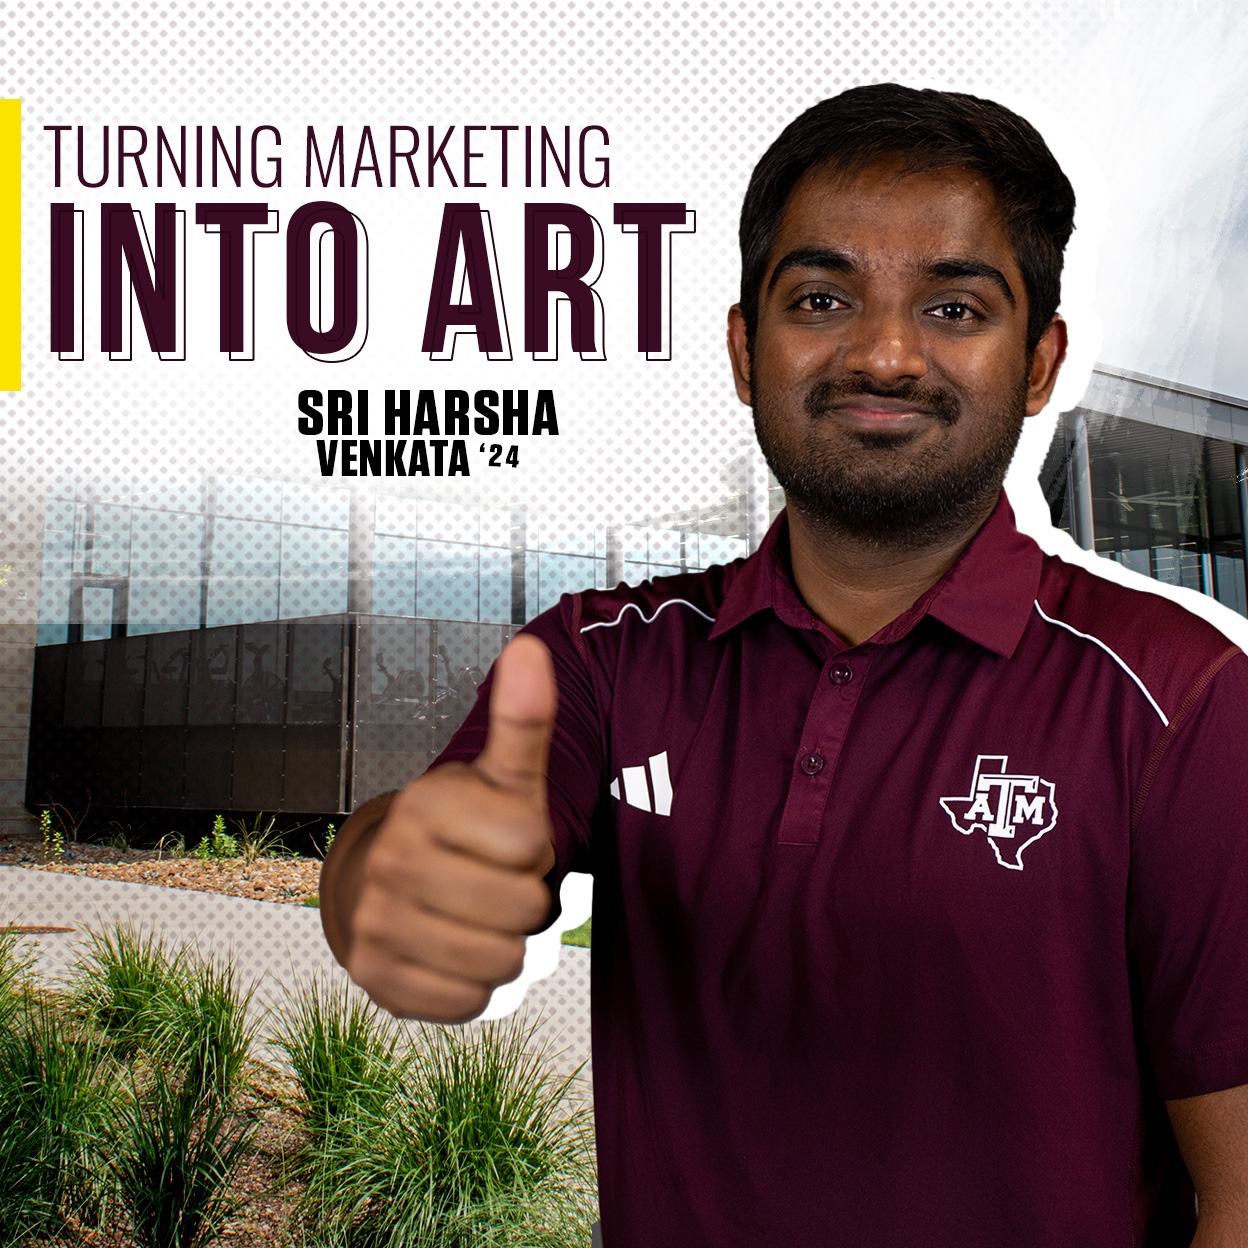 image states "Turning marketing into art" and includes a photo of Sri Harsha Venkata '23 with the Southside rec center in the backdrop